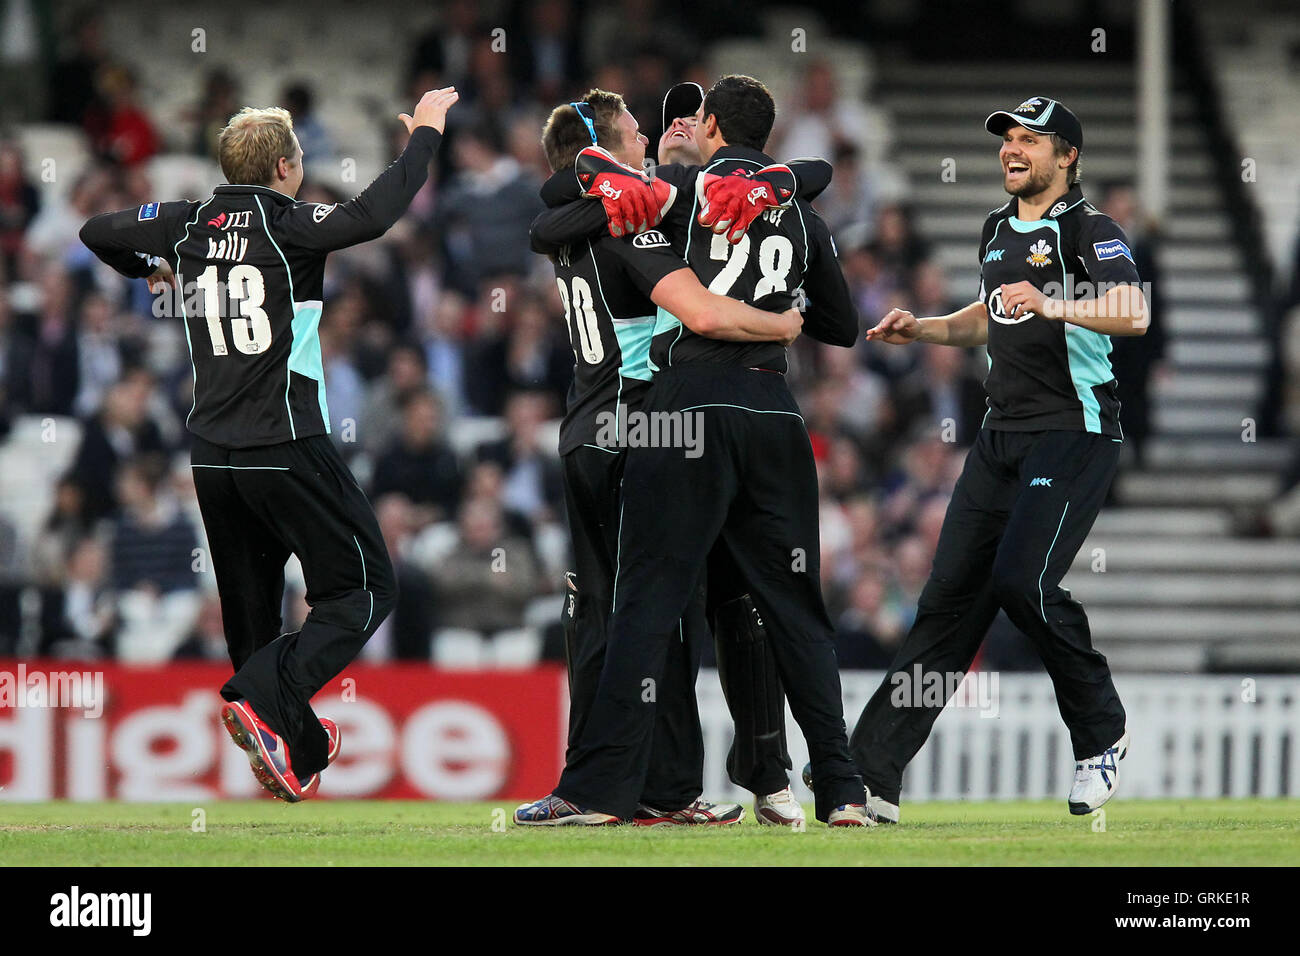 Surrey players celebrate the wicket of Graham Napier - Surrey Lions vs Essex Eagles - Friends Life T20 South Division Cricket at the Kia Oval,London - 13/06/12. Stock Photo